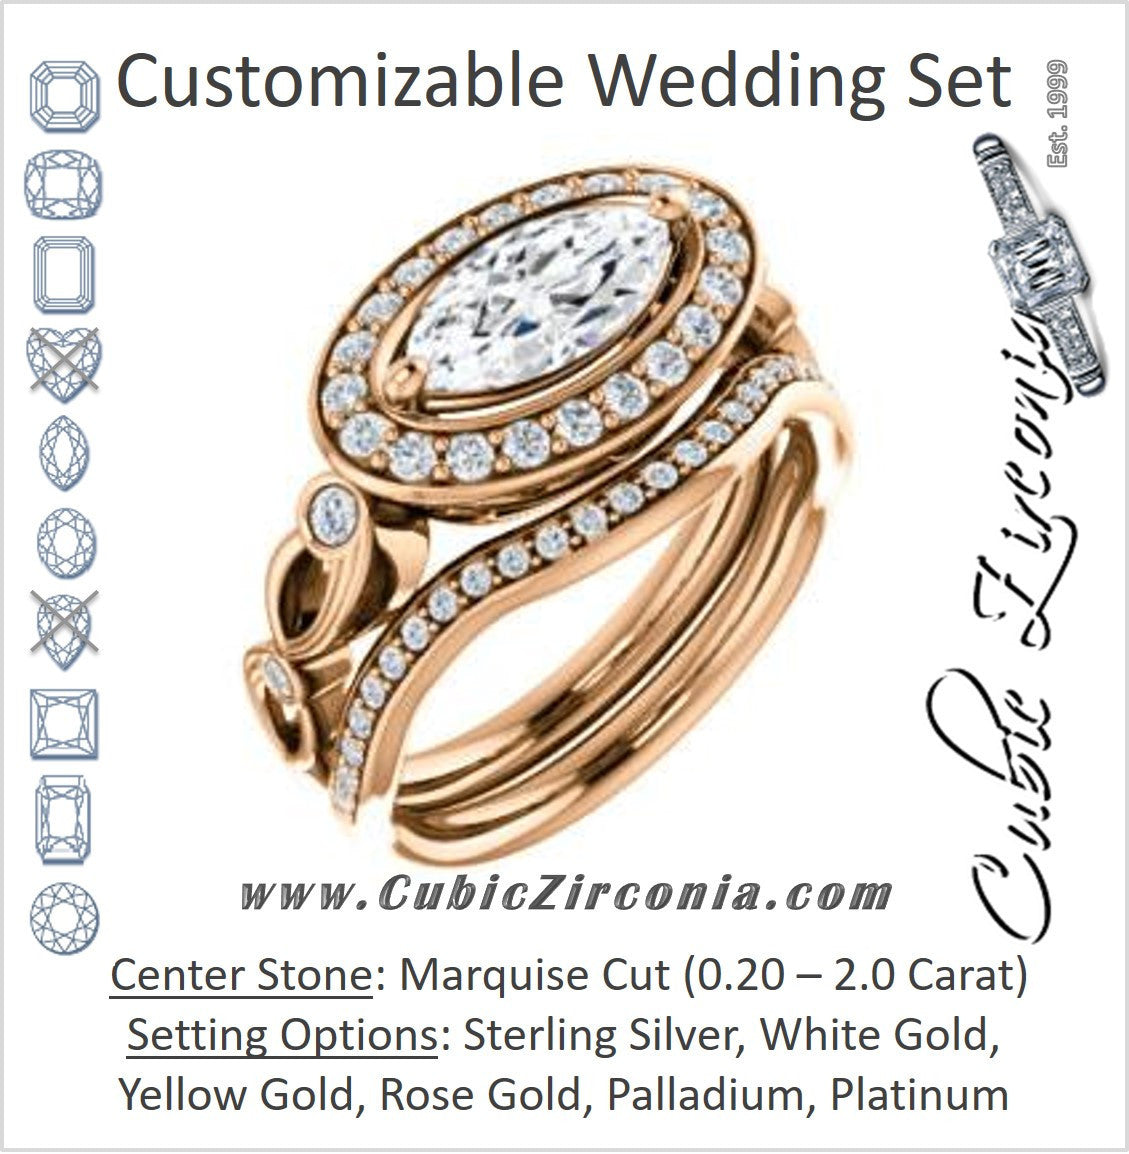 CZ Wedding Set, featuring The Madison engagement ring (Customizable Marquise Cut Design with Halo and Bezel-Accented Infinity-inspired Split Band)